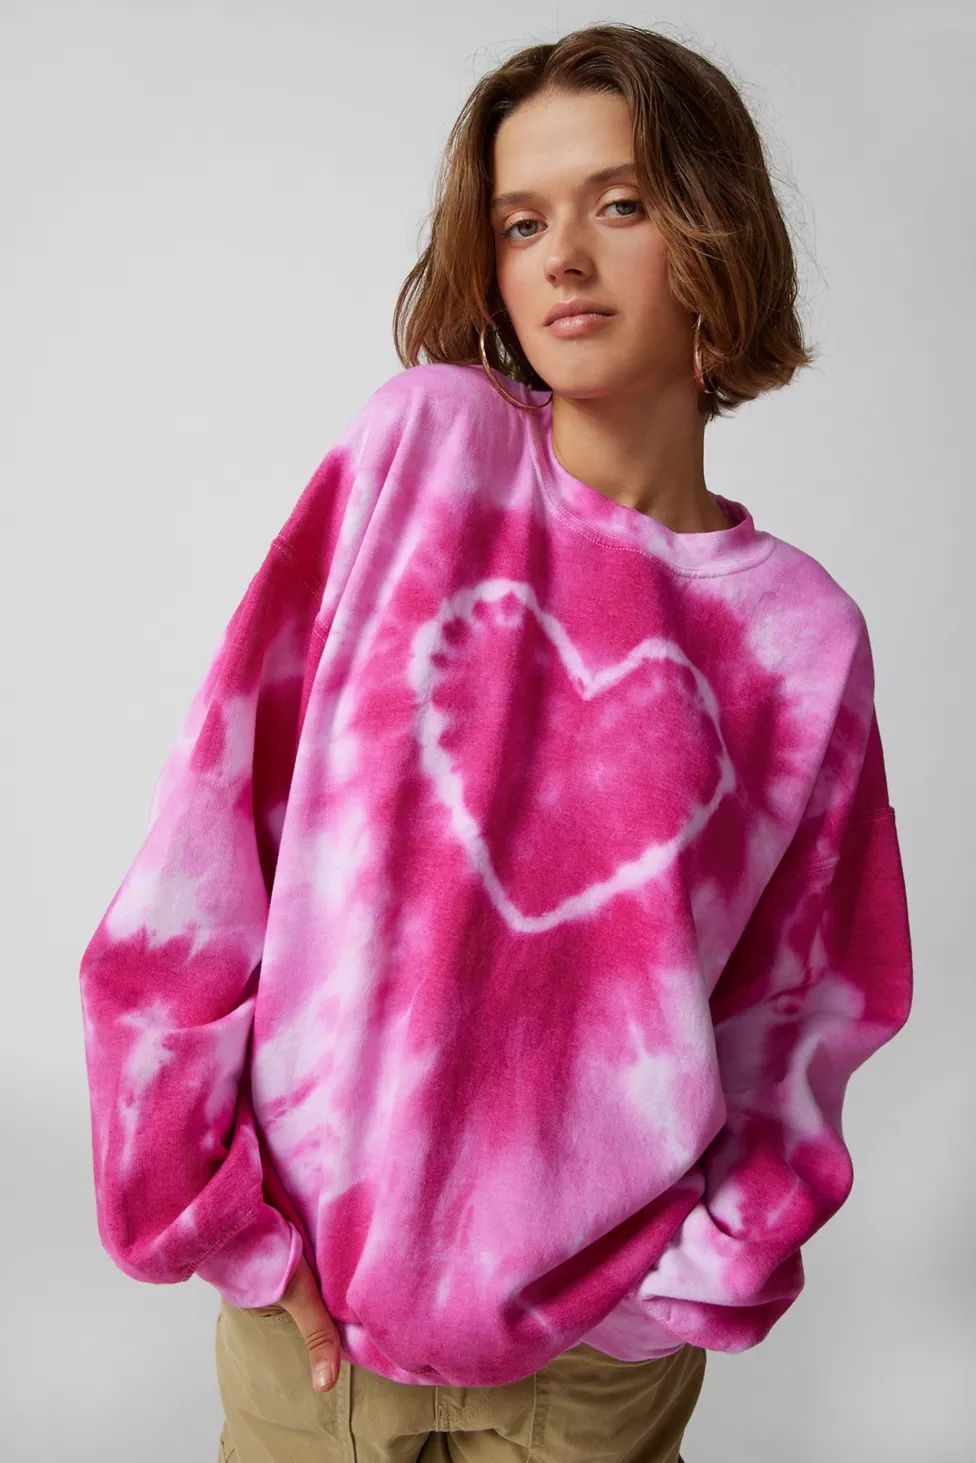 Urban Outfitters Pink Heart Crewneck